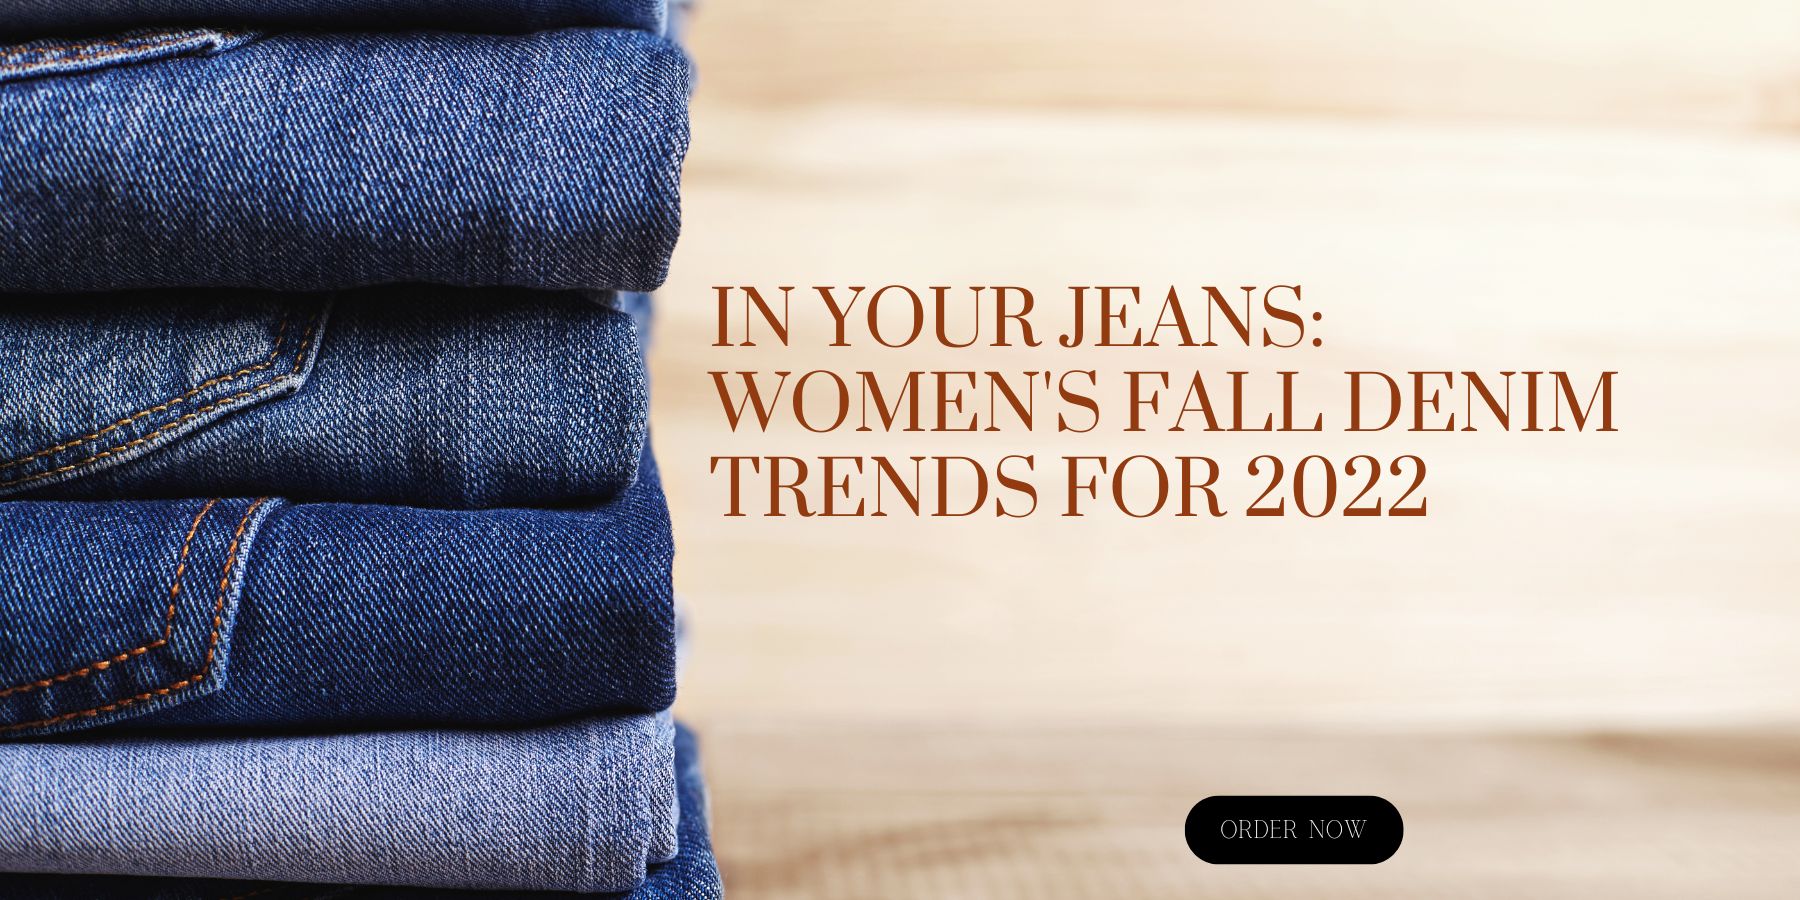 In Your Jeans: Women's Fall Denim Trends for 2022